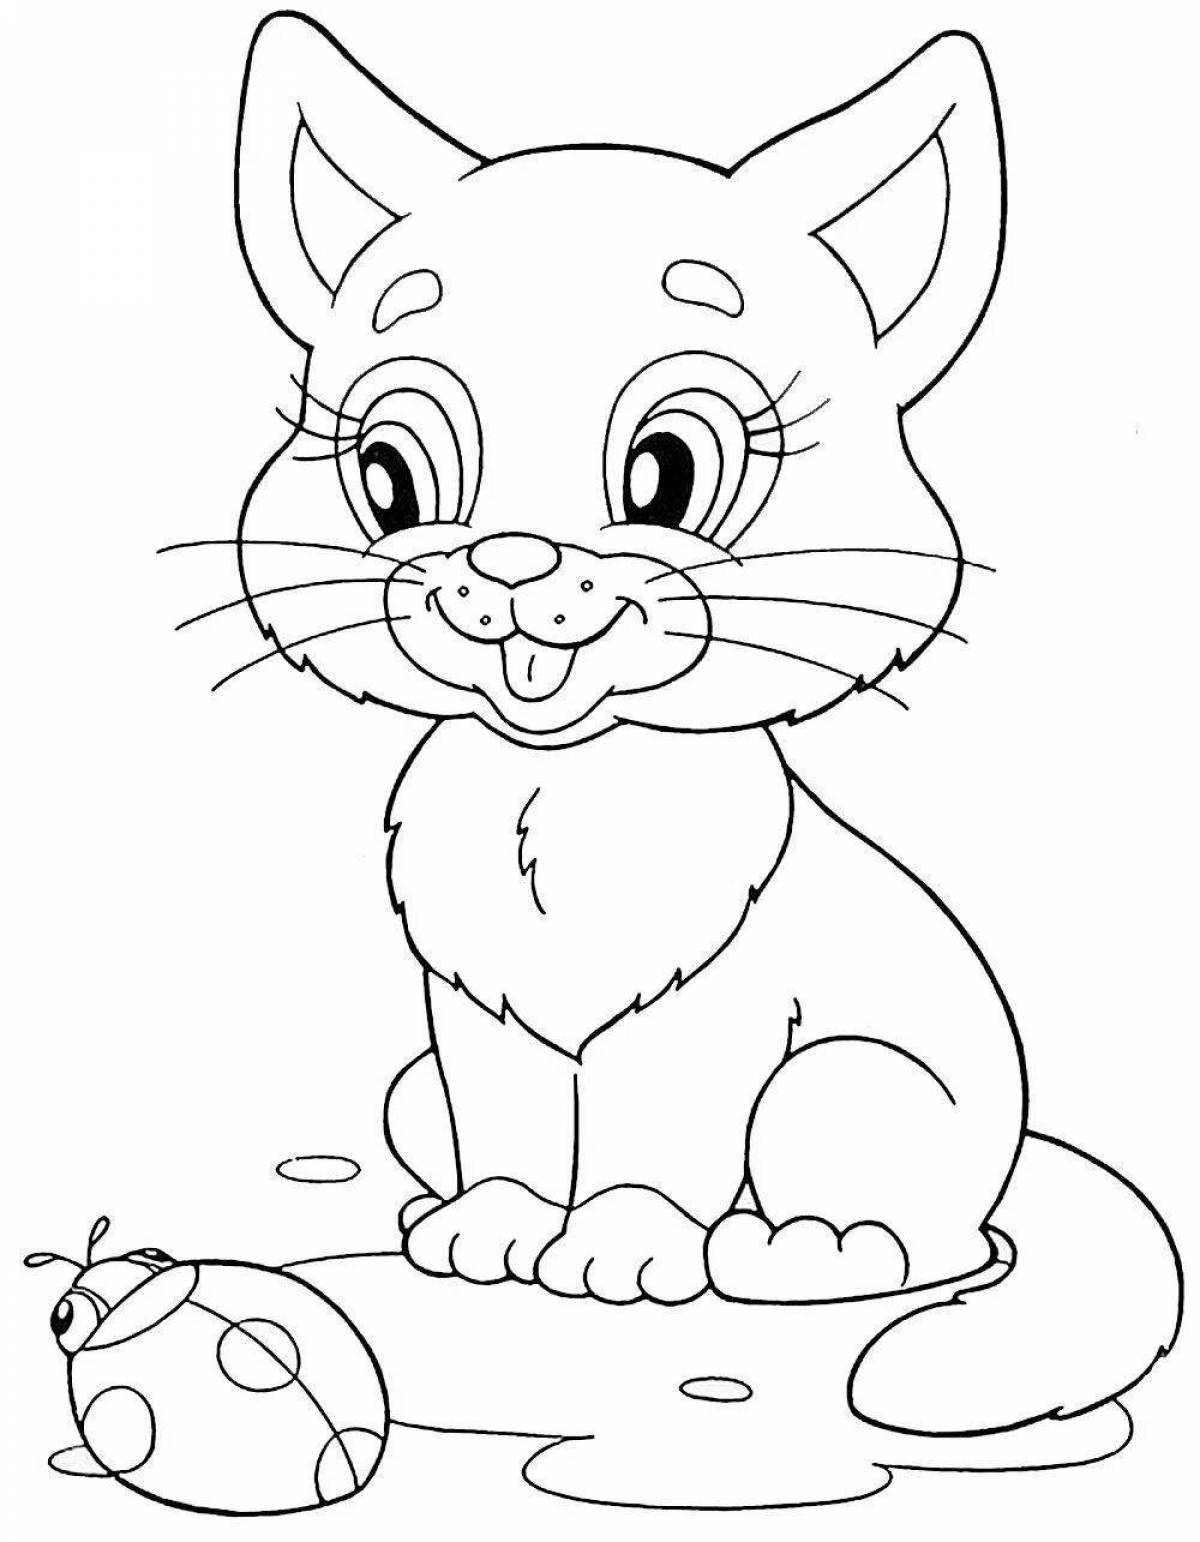 Creative animal coloring pages for kids